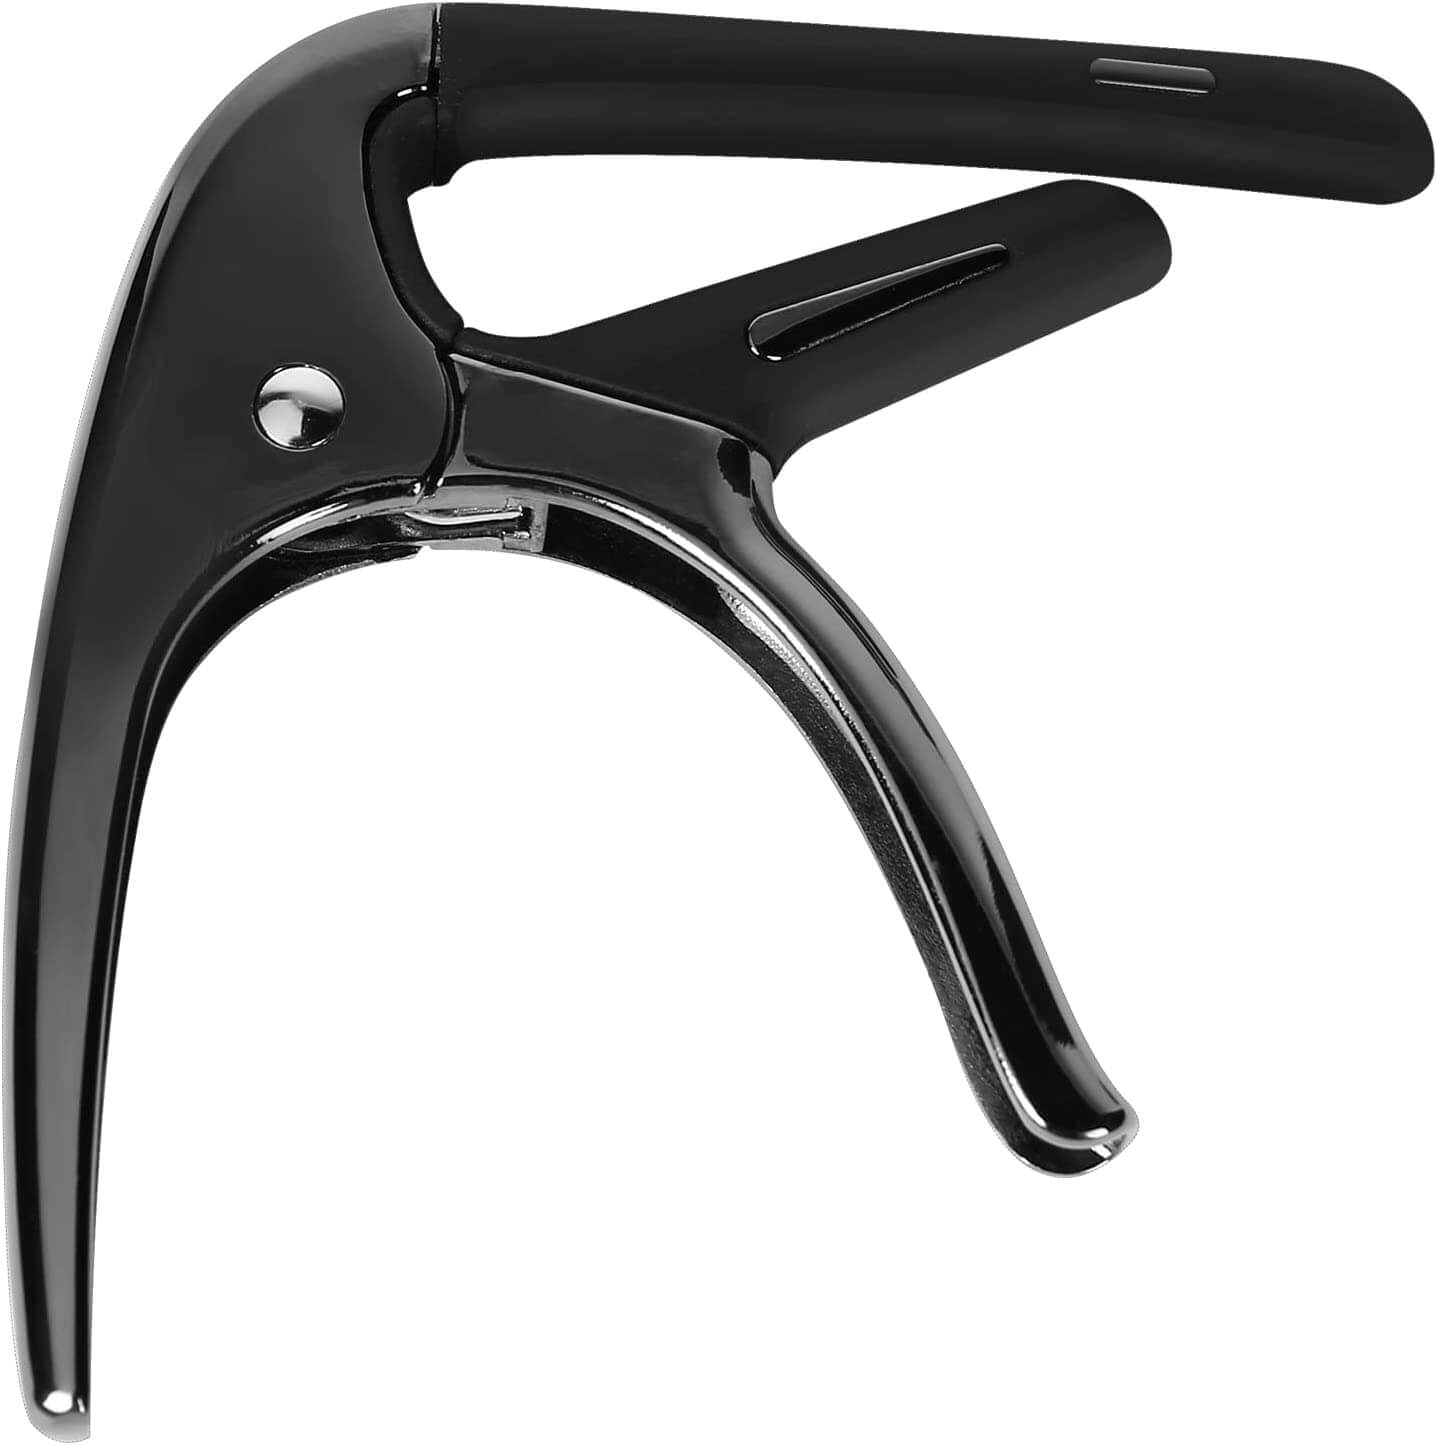 SGPRO Capo for Guitars Acoustic and Electric with Ajustable Spring and  Trigger Tension, Handy String Pin Puller and Fashionable Hard Zinc Alloy  Design